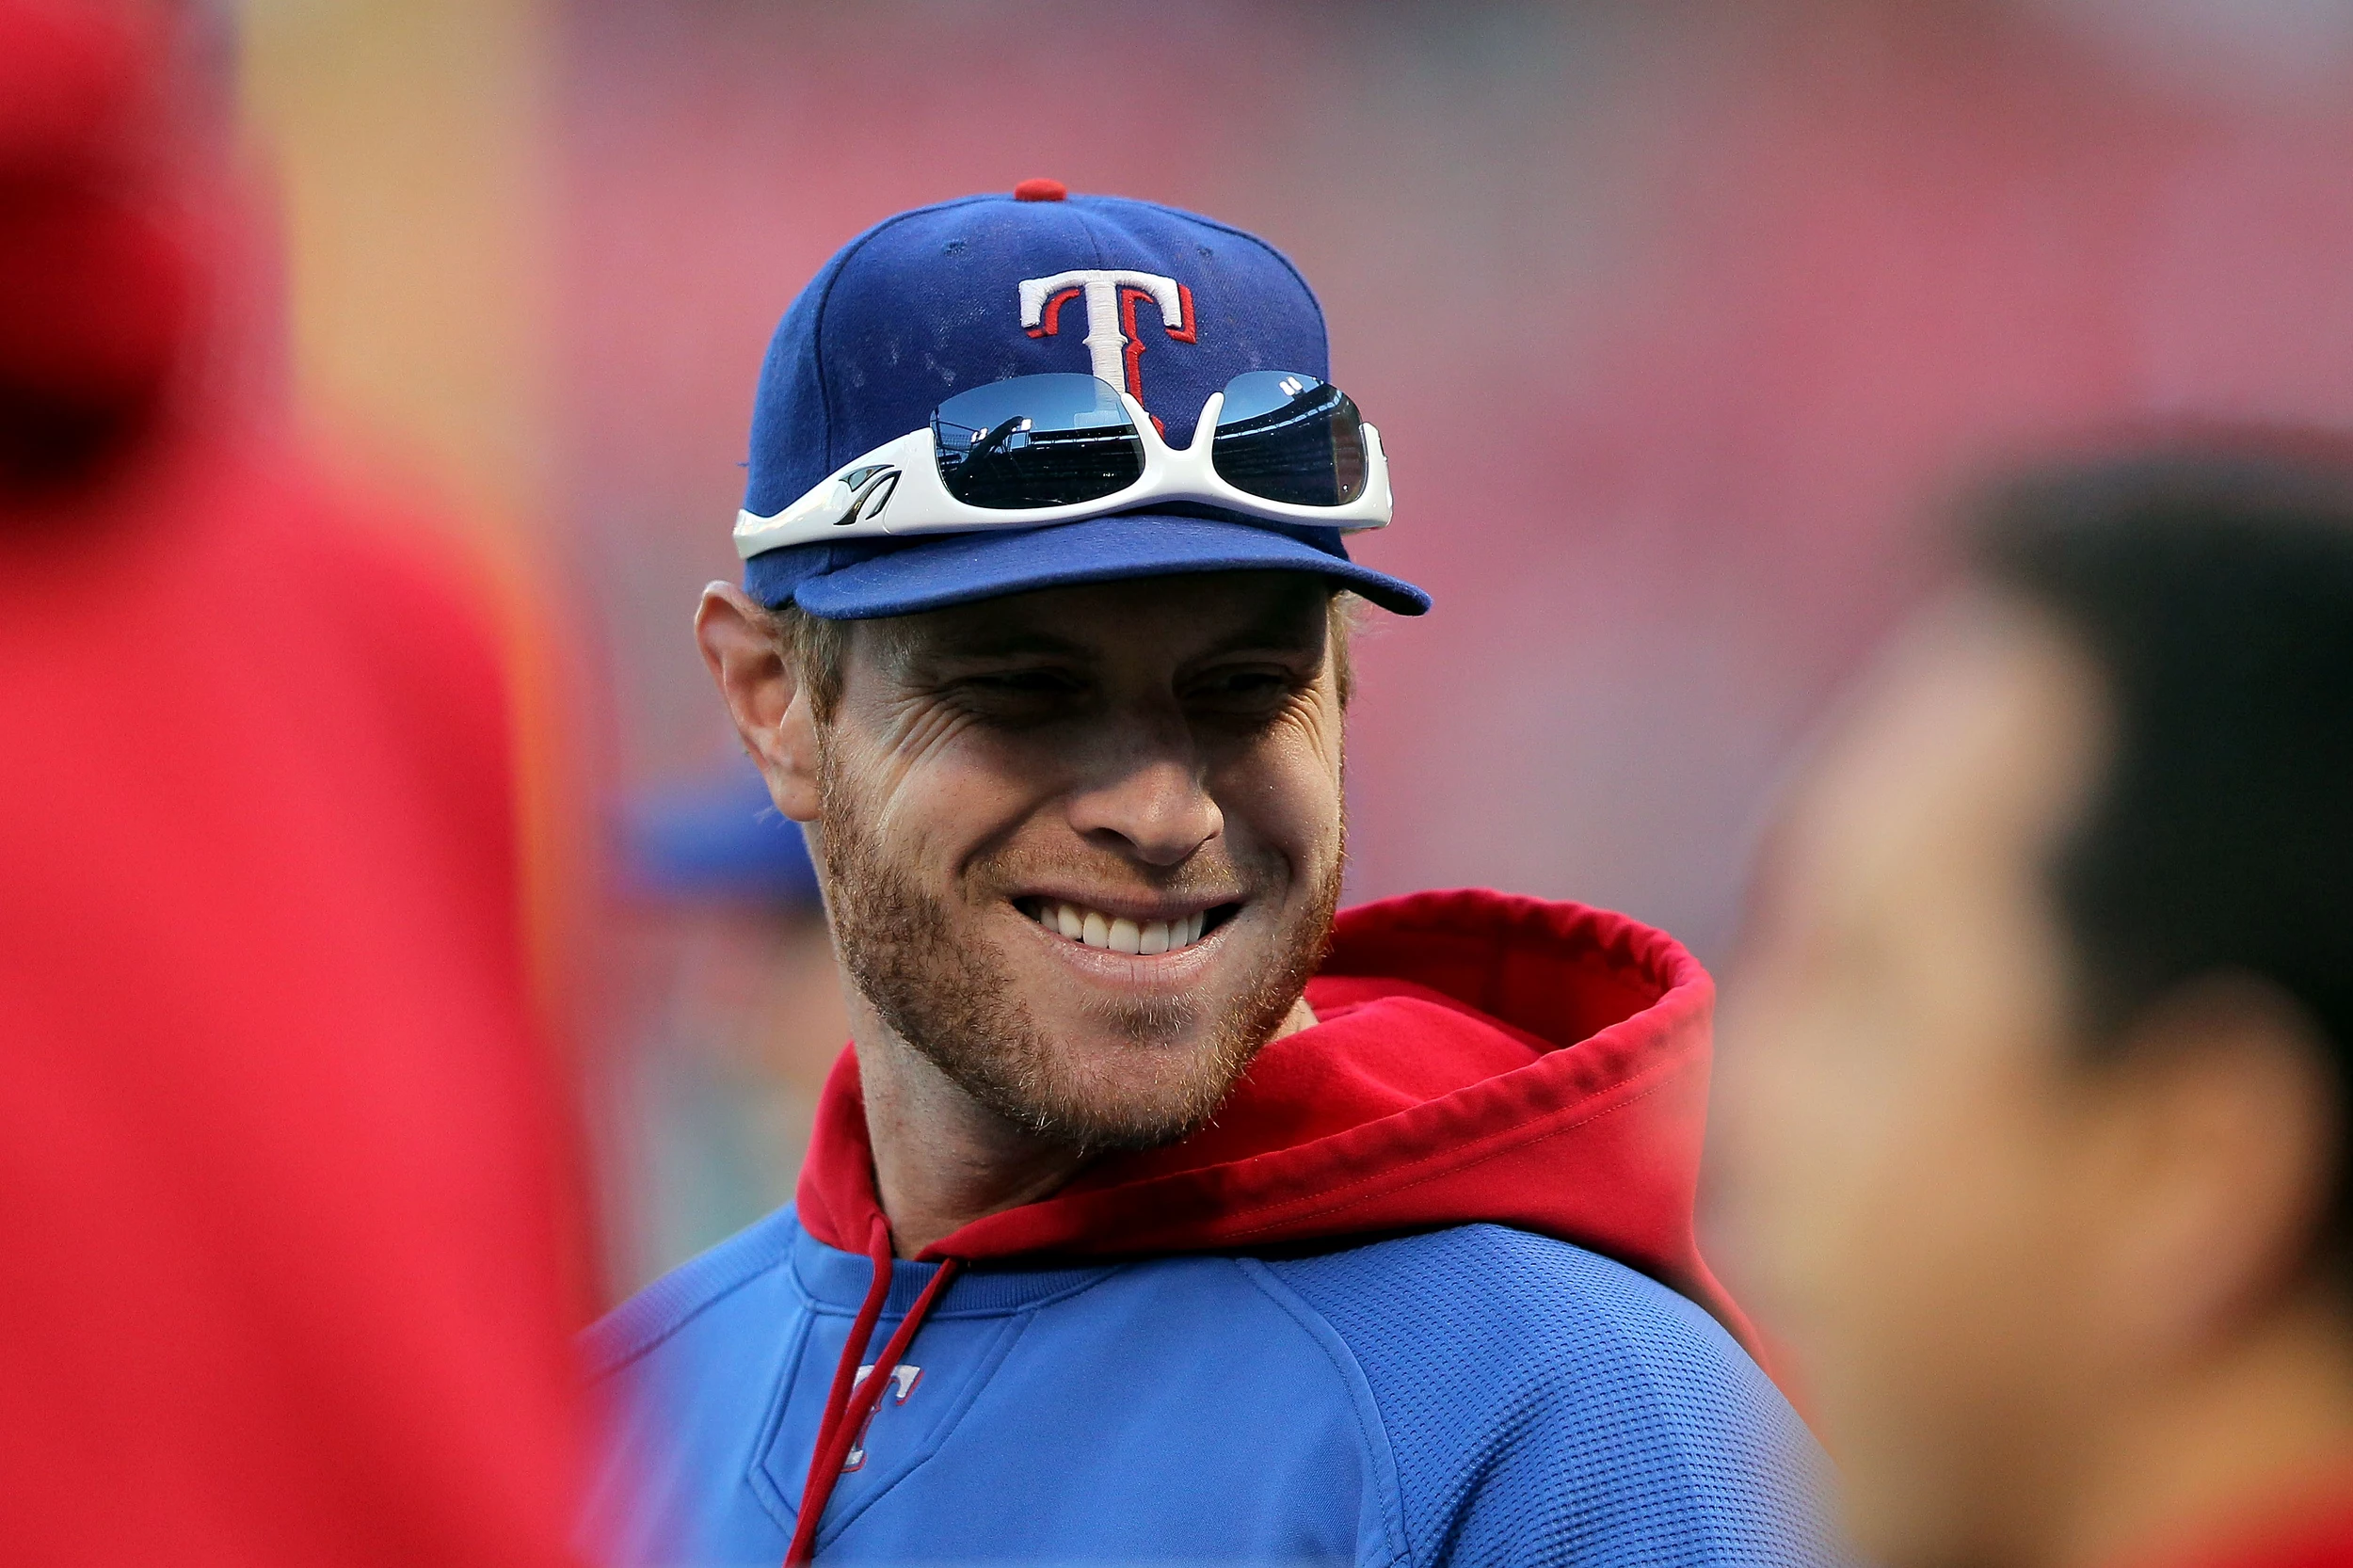 The Texas Rangers won the ALCS in 2010. Instead of celebrating with  champagne, they decided to drizzle soda for Josh Hamilton to participate.  Hamilton was away from baseball for several years due